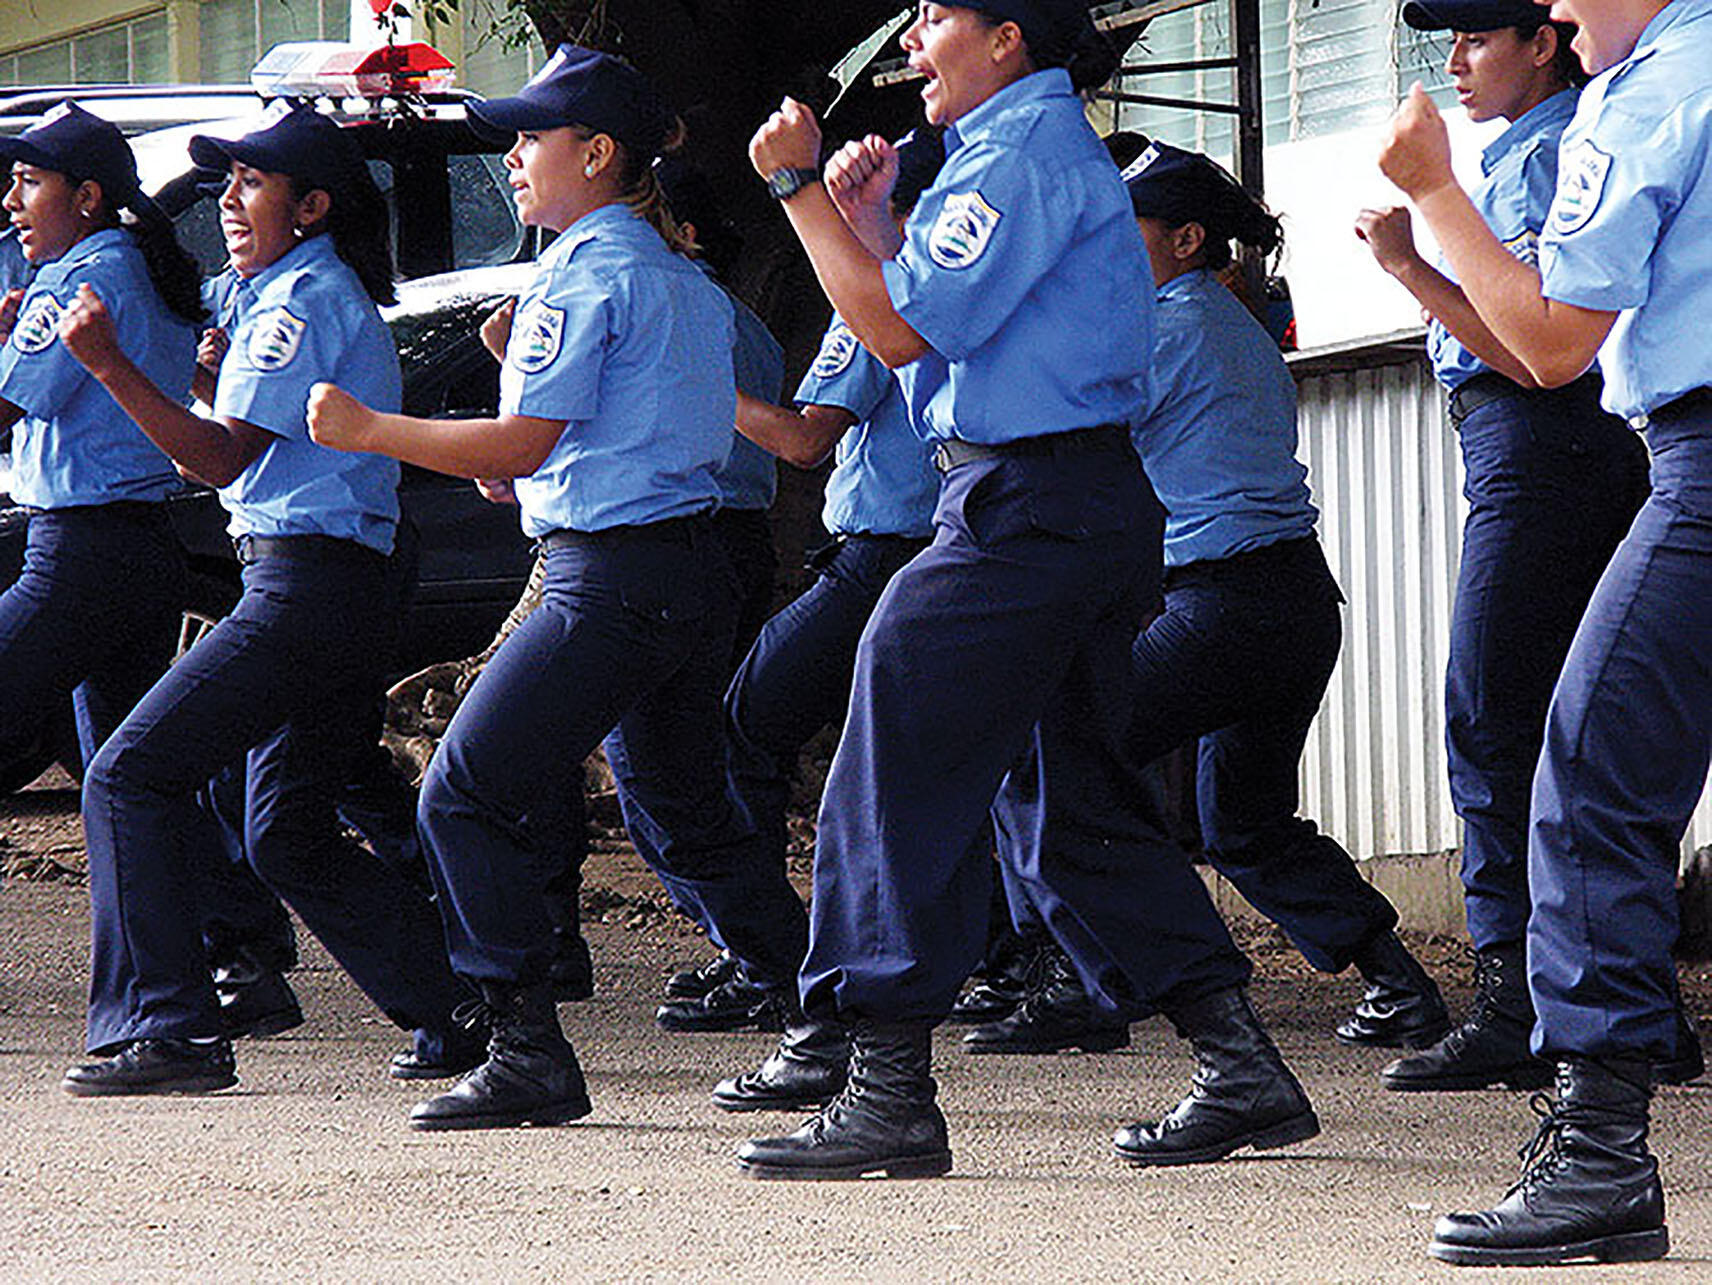 Nicaraguan police officers in formation participate in a cooperative training session put on by the national police academy and the Swedish police force. (Photo by Ann Kroon.)